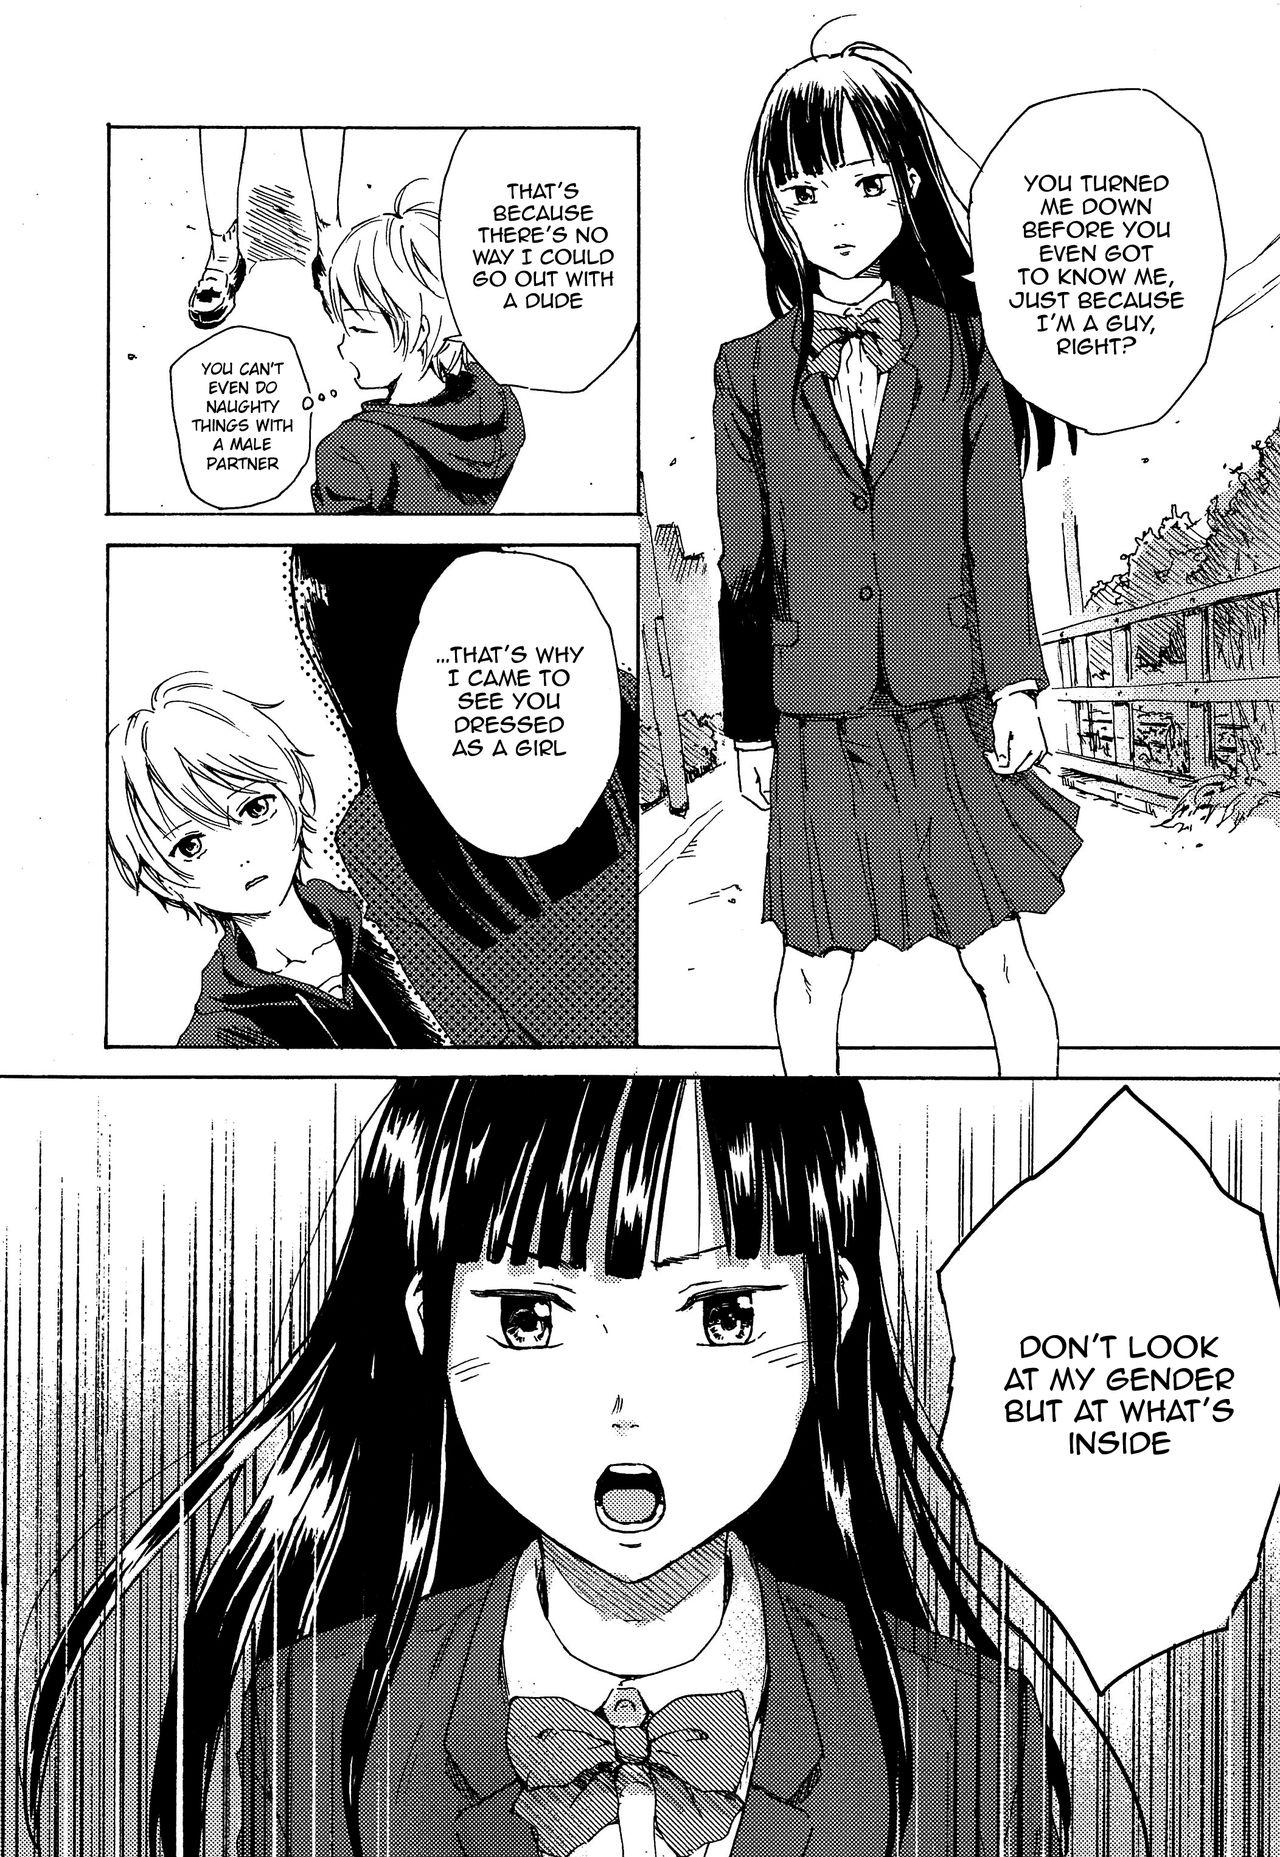 Thot Skirt in the Kataomoi | Skirt in the Unrequited Love - Original Ghetto - Page 11